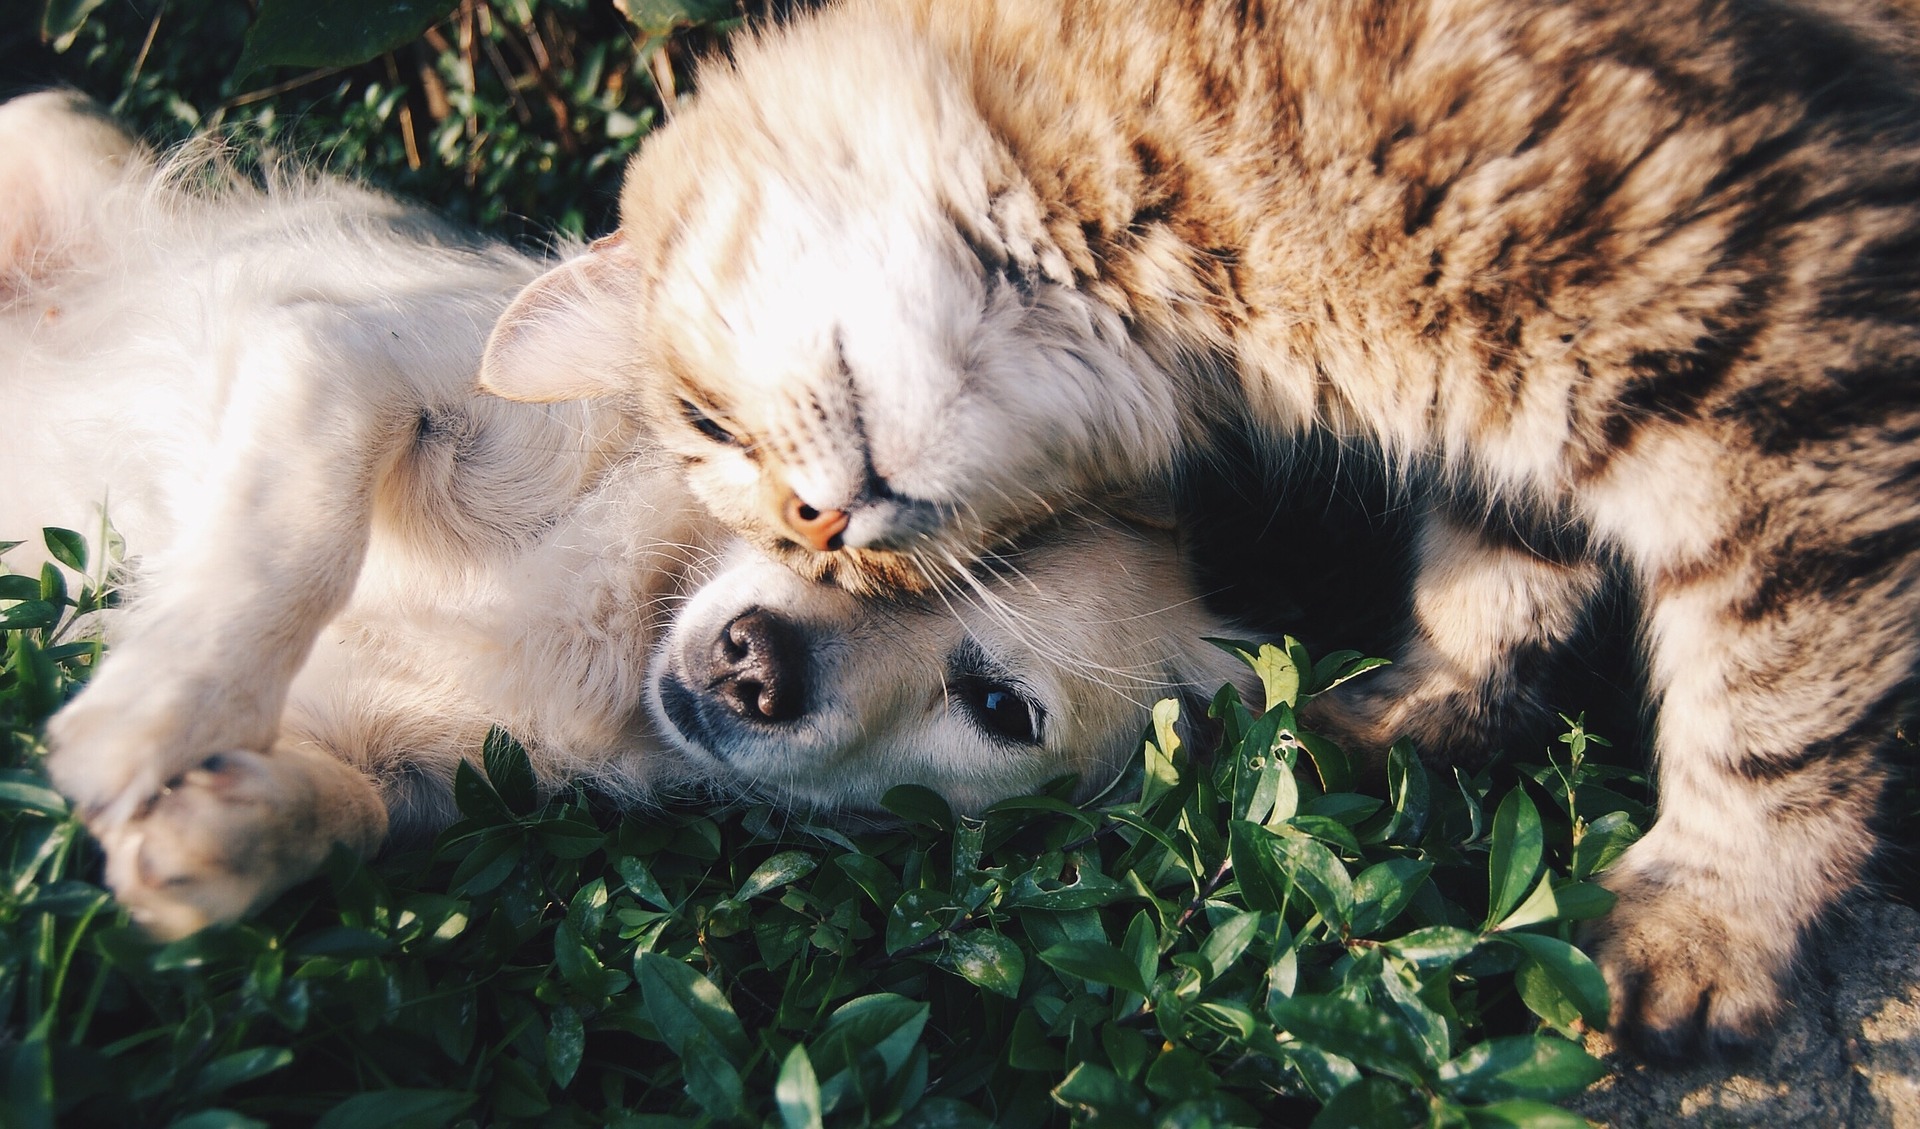 anesthesia-free dentistry is bad for your pet - cat and dog cuddling